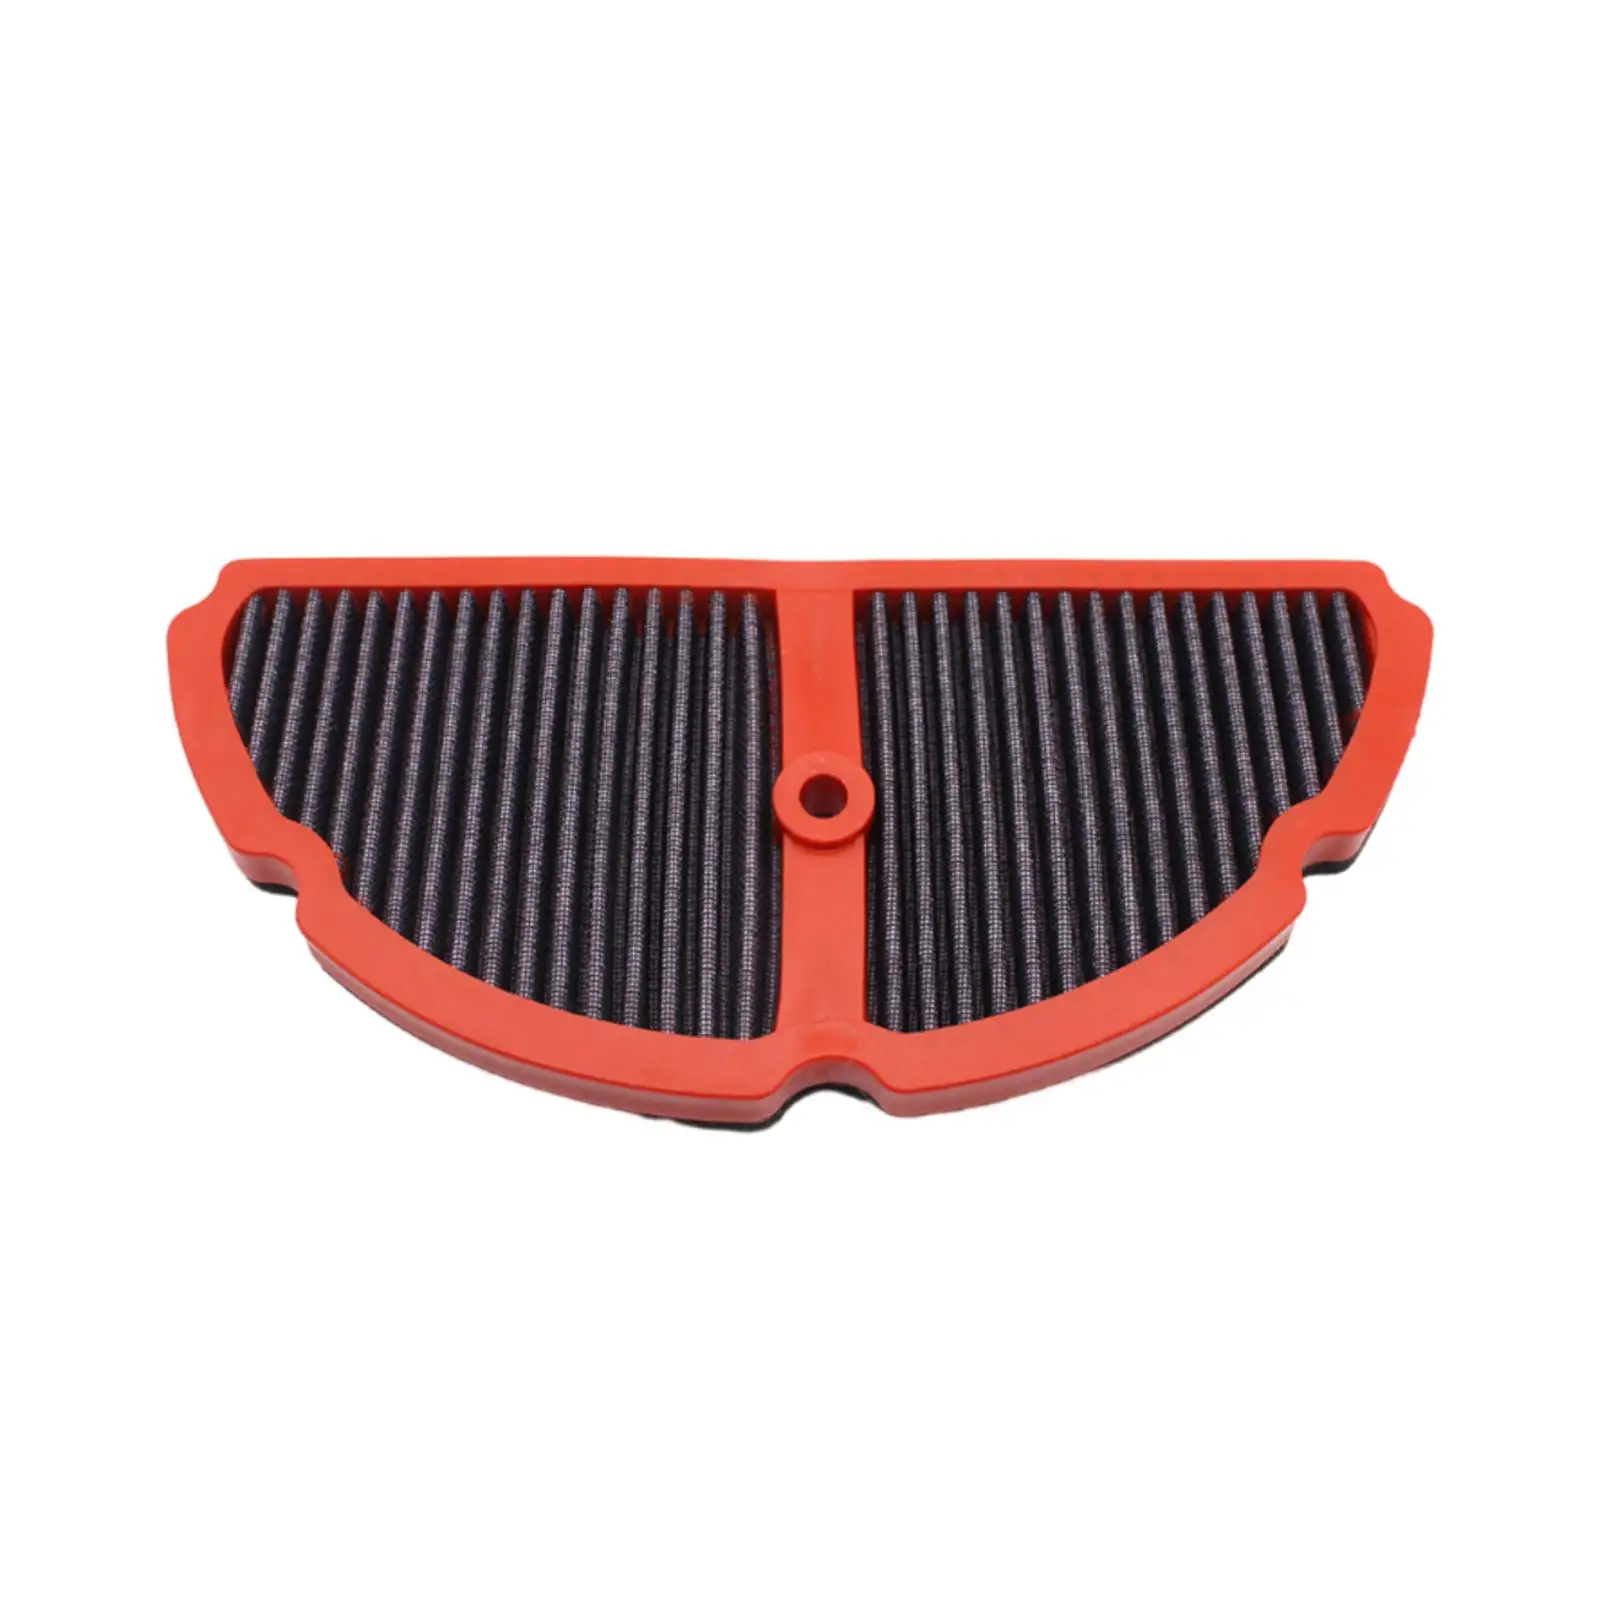 Motorcycle Air Filter Parts Accessory High Performance Air Filter for Benellis BN502 2014-2019 BN502R 2017-19 Tnt600 2018-19